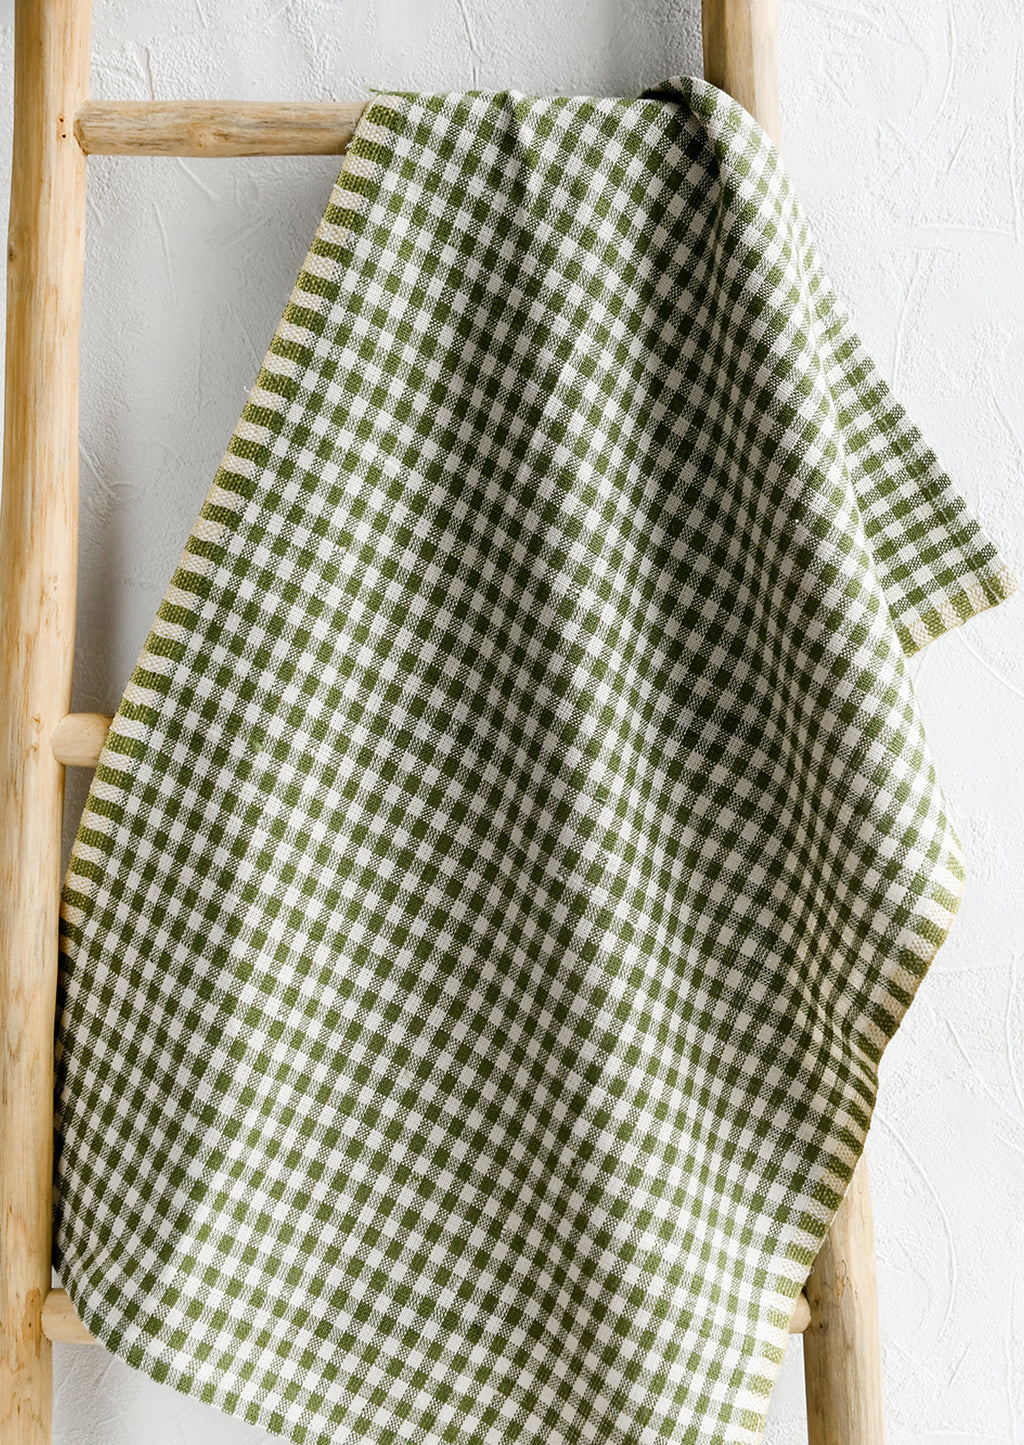 Olive Green: A woven gingham linen tea towel in olive green color.